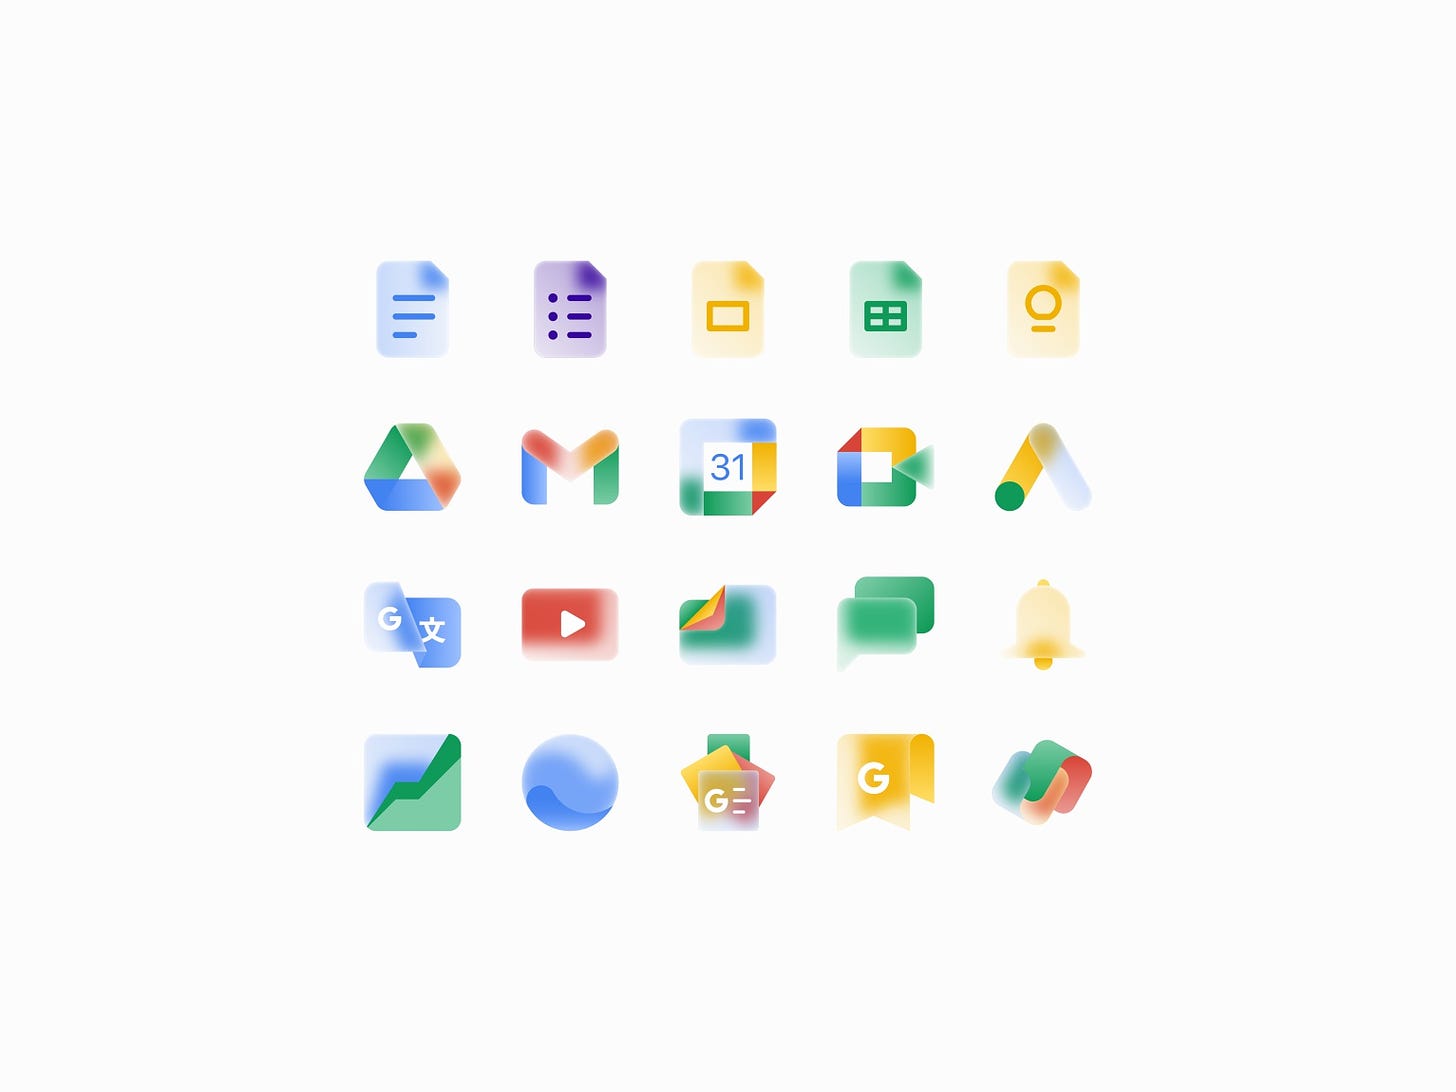 Frosted glass effect - Google suite logo pack by Zihui Yang on Dribbble